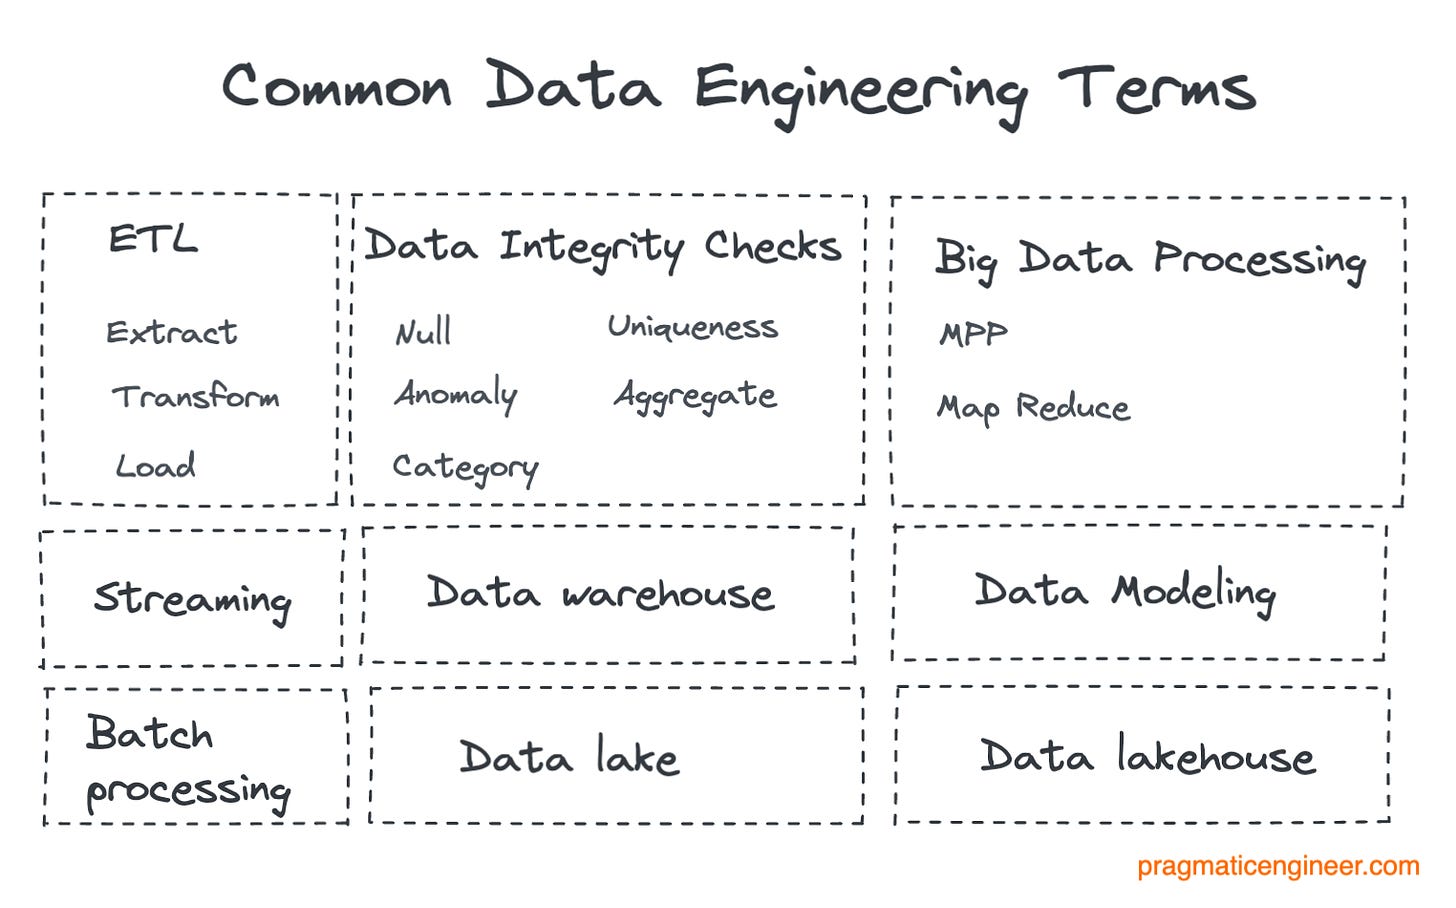 Common data engineering terms